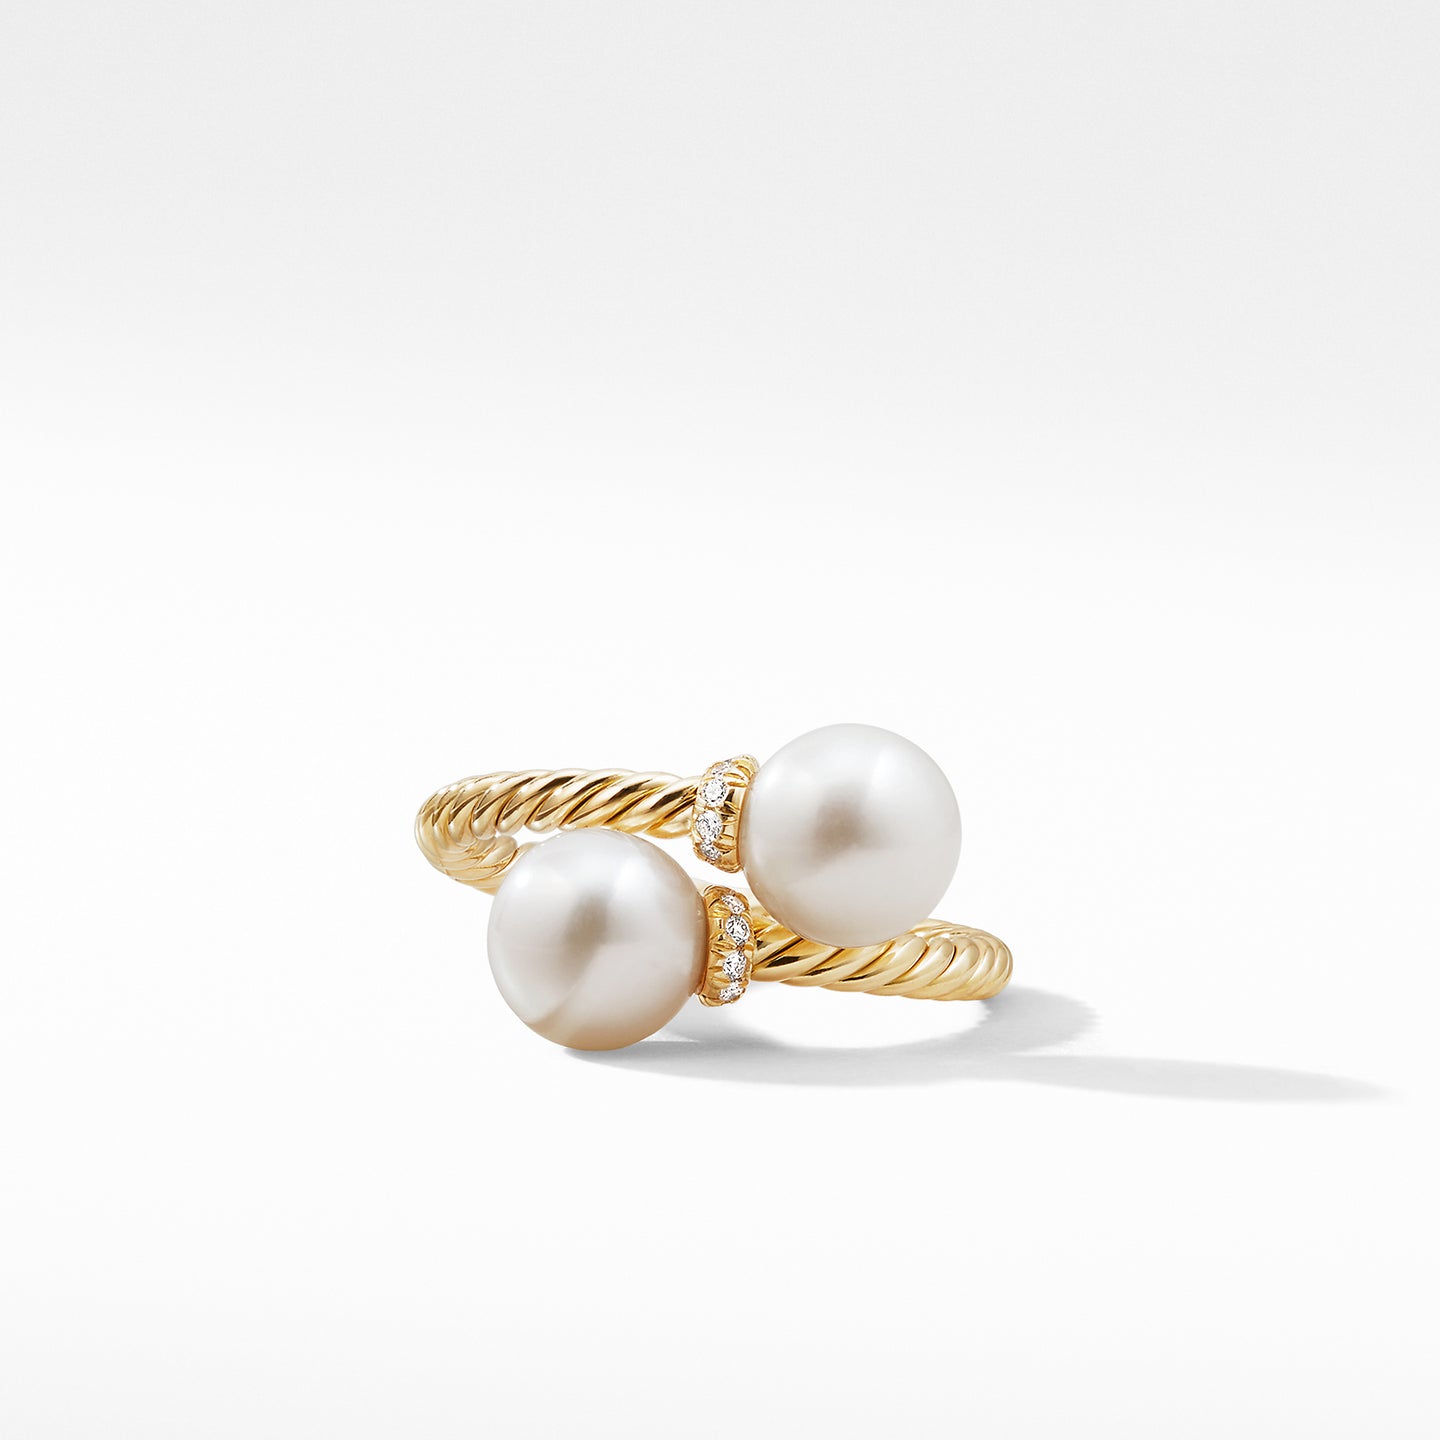 Bypass Ring with Pearls and Diamonds in 18K Gold, Size 7